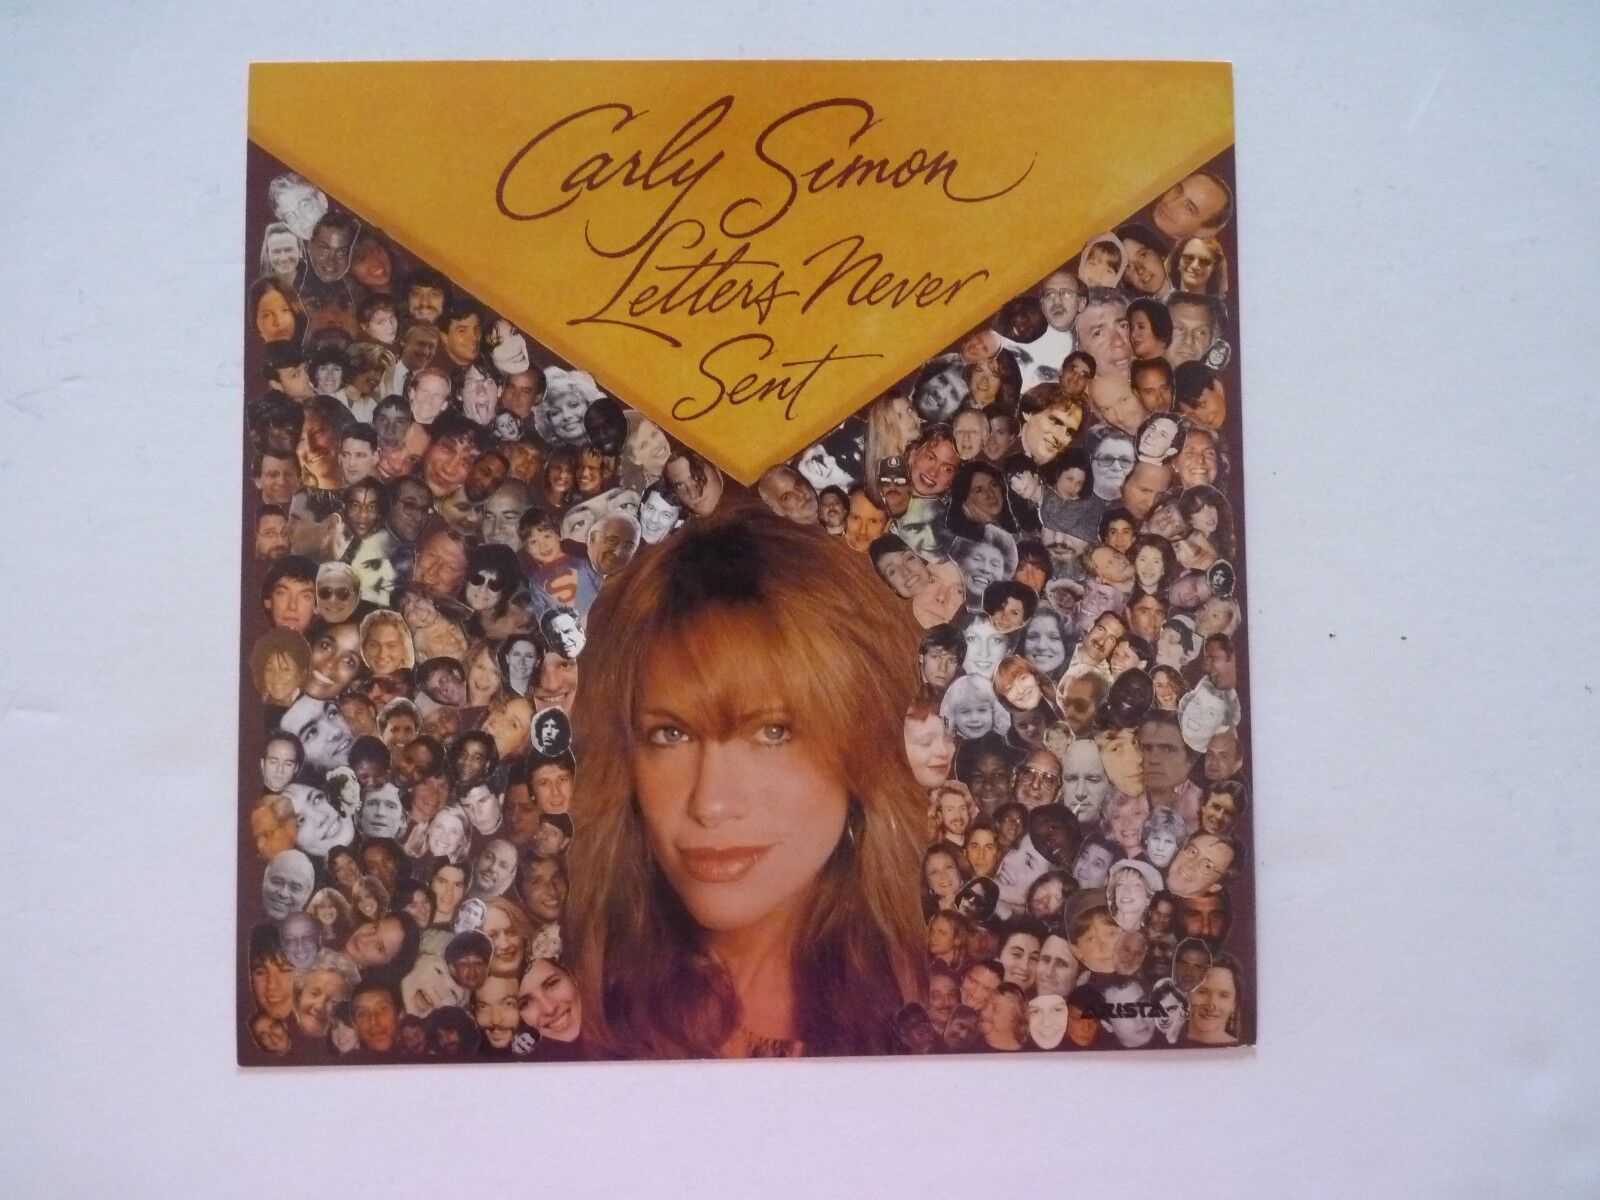 Carly Simon Letters Never Sent LP Record Photo Poster painting Flat 12x12 Poster